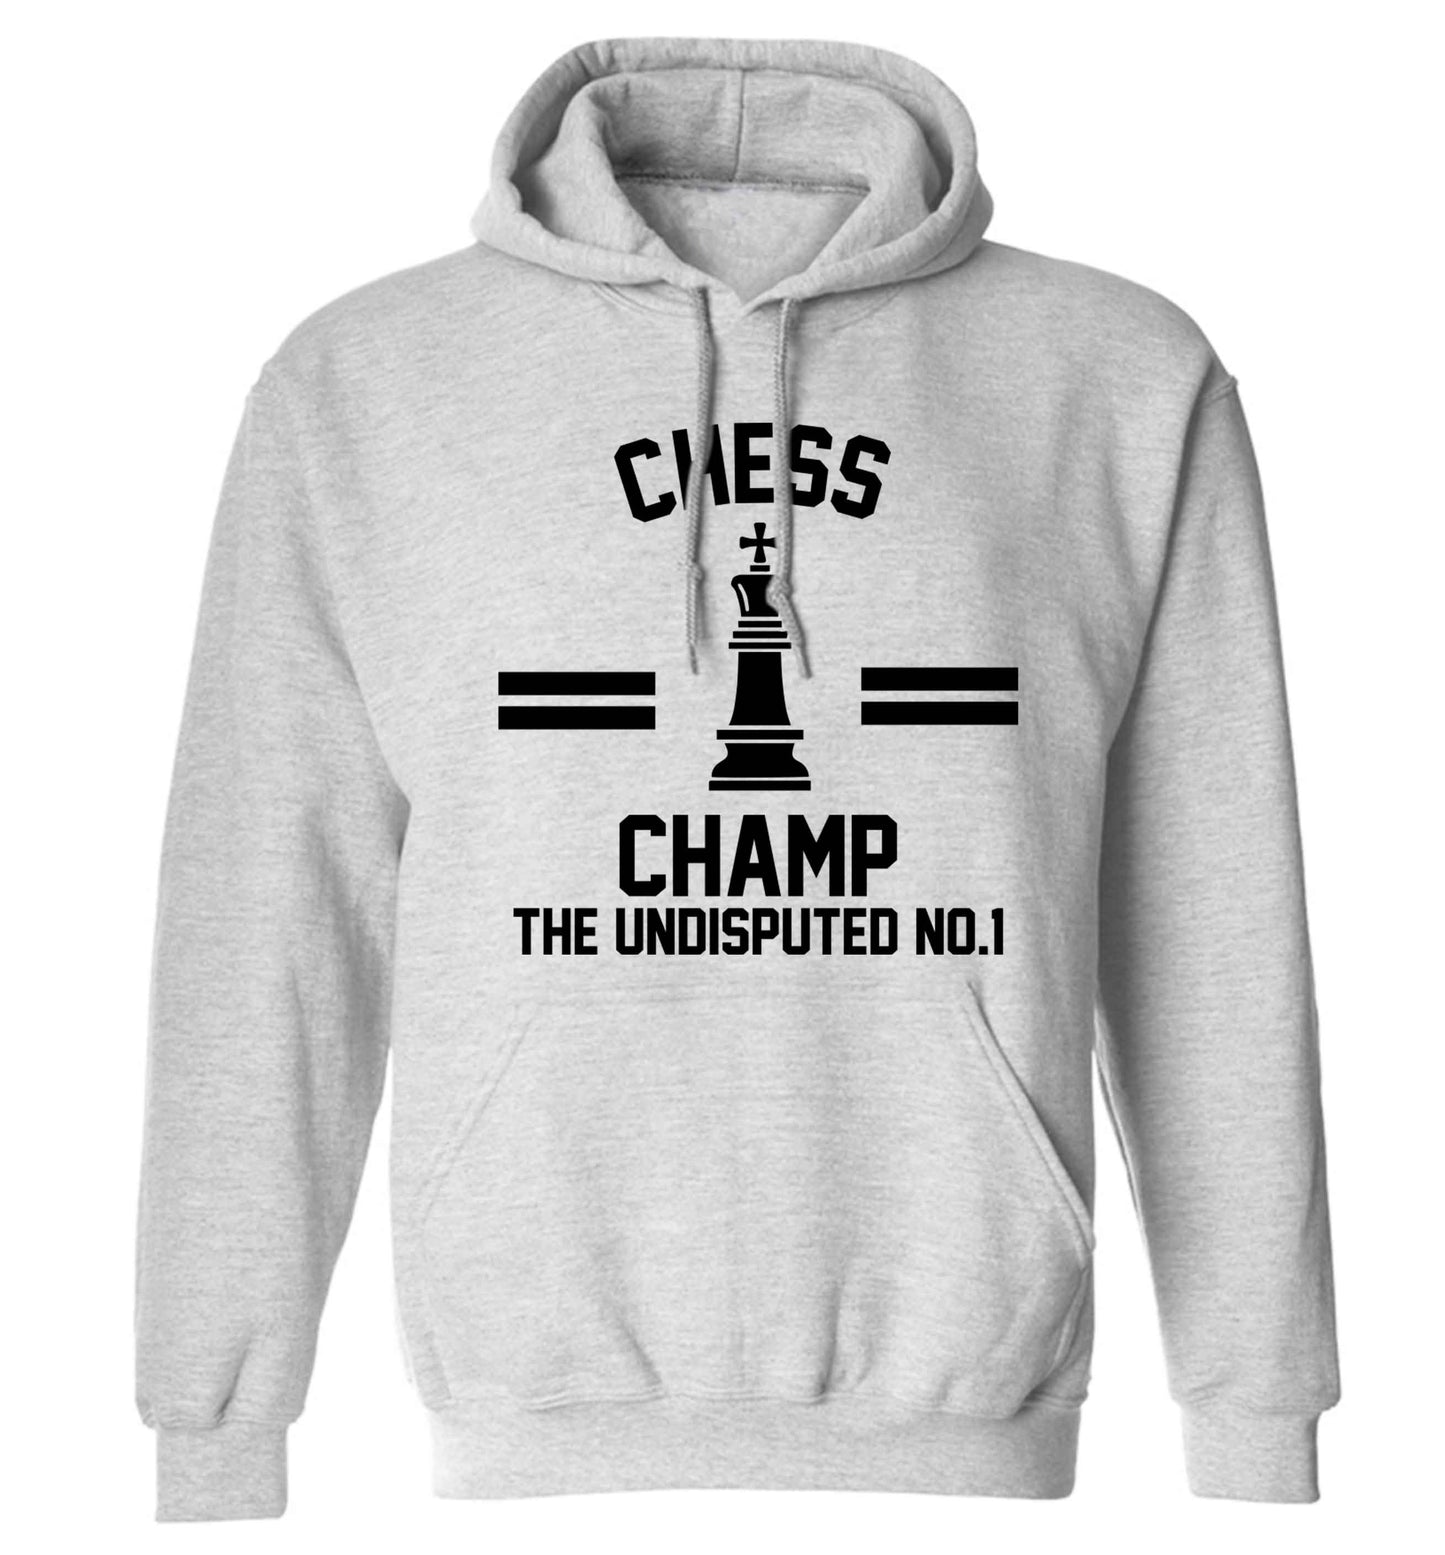 Undisputed chess championship no.1  adults unisex grey hoodie 2XL